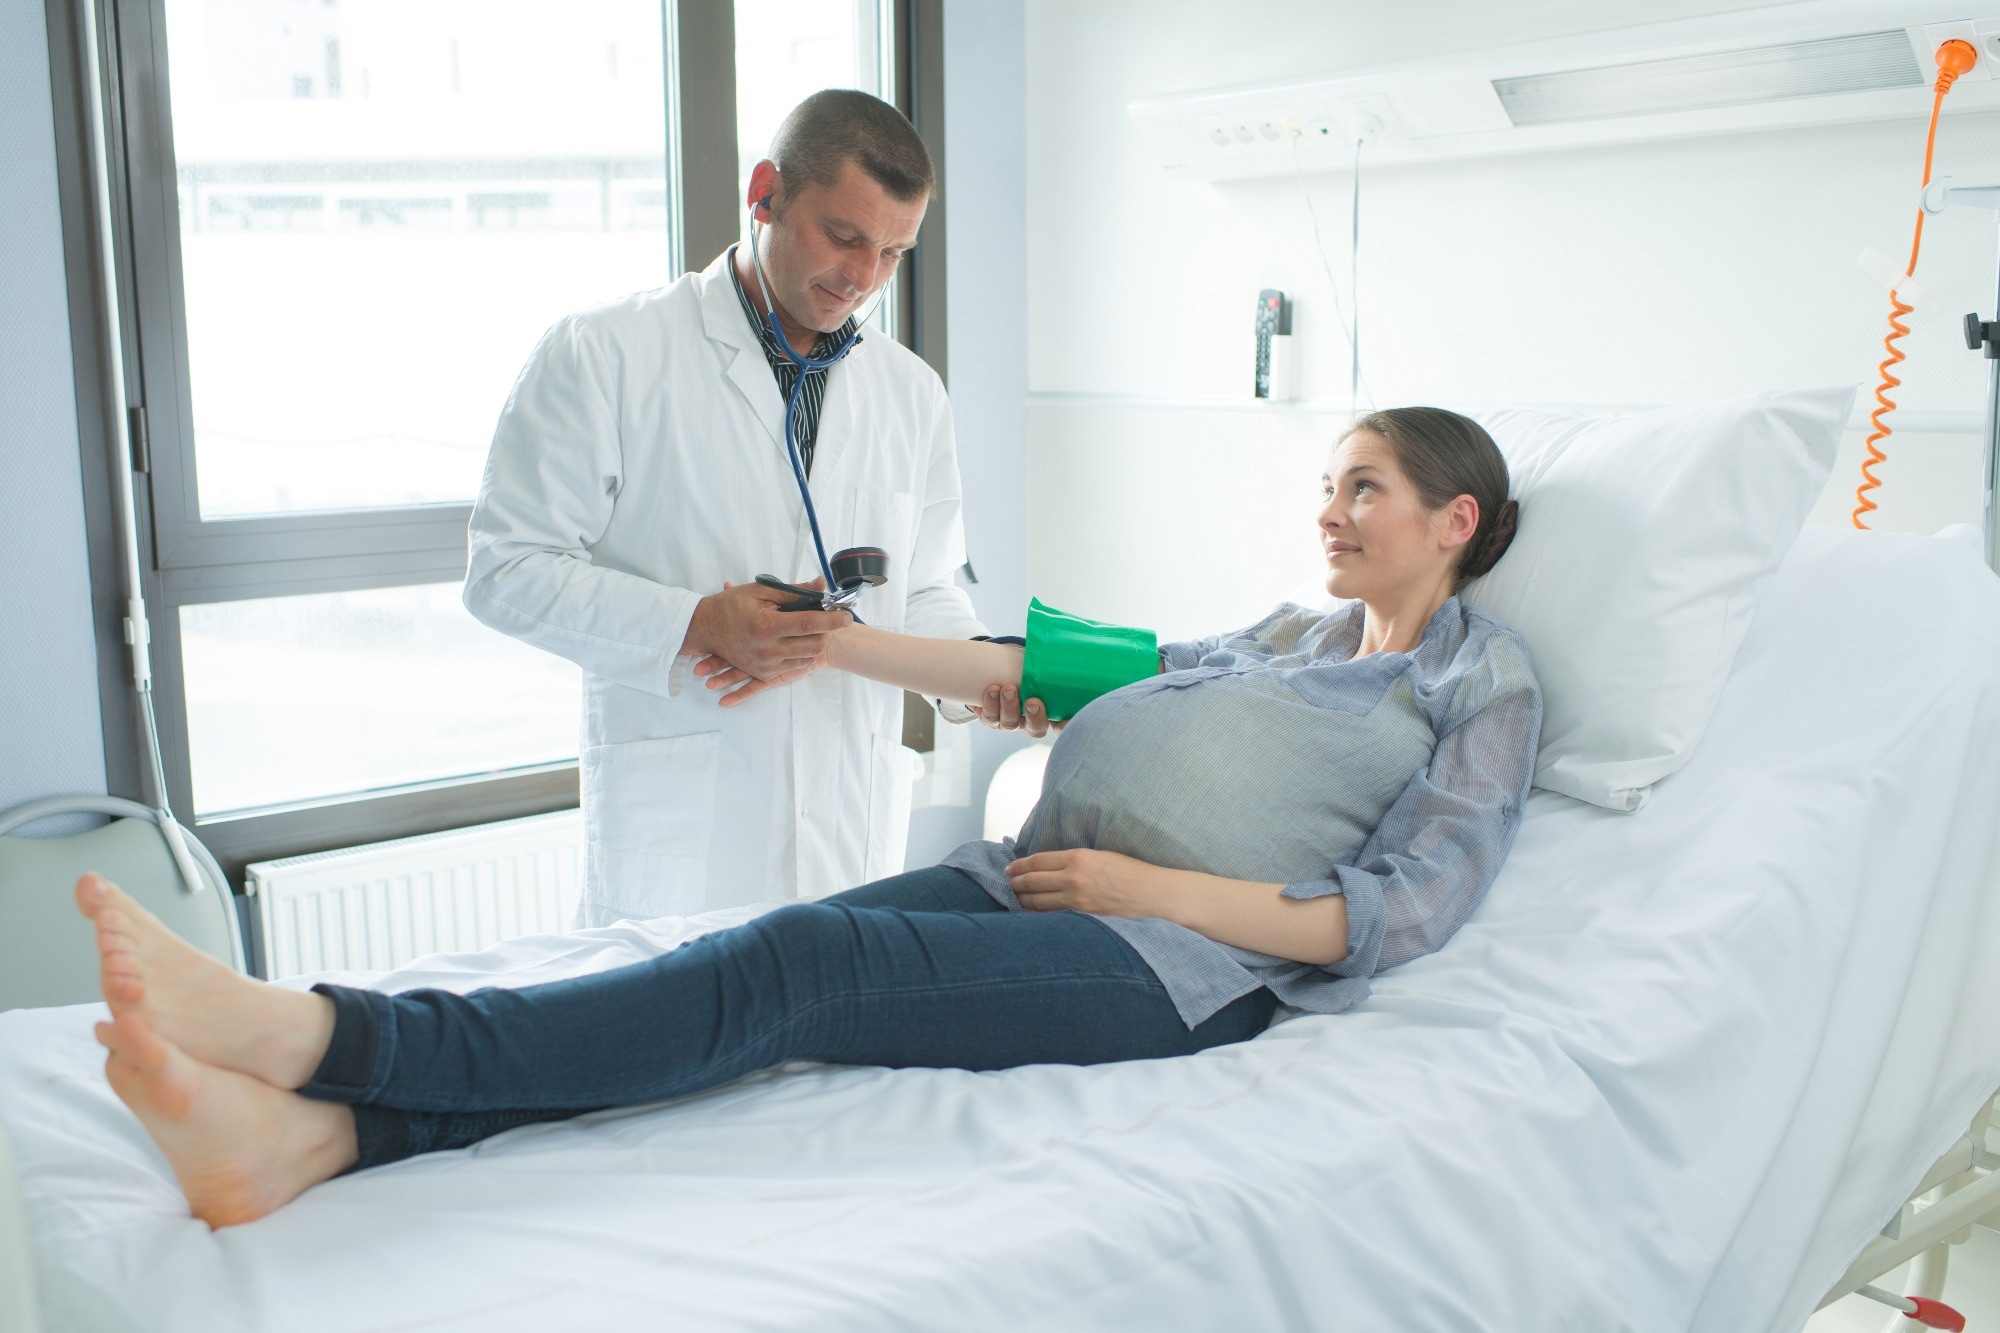 Study: Association of Hypertensive Disorders of Pregnancy With Future Cardiovascular Disease. Image Credit: ALPA PROD / Shutterstock